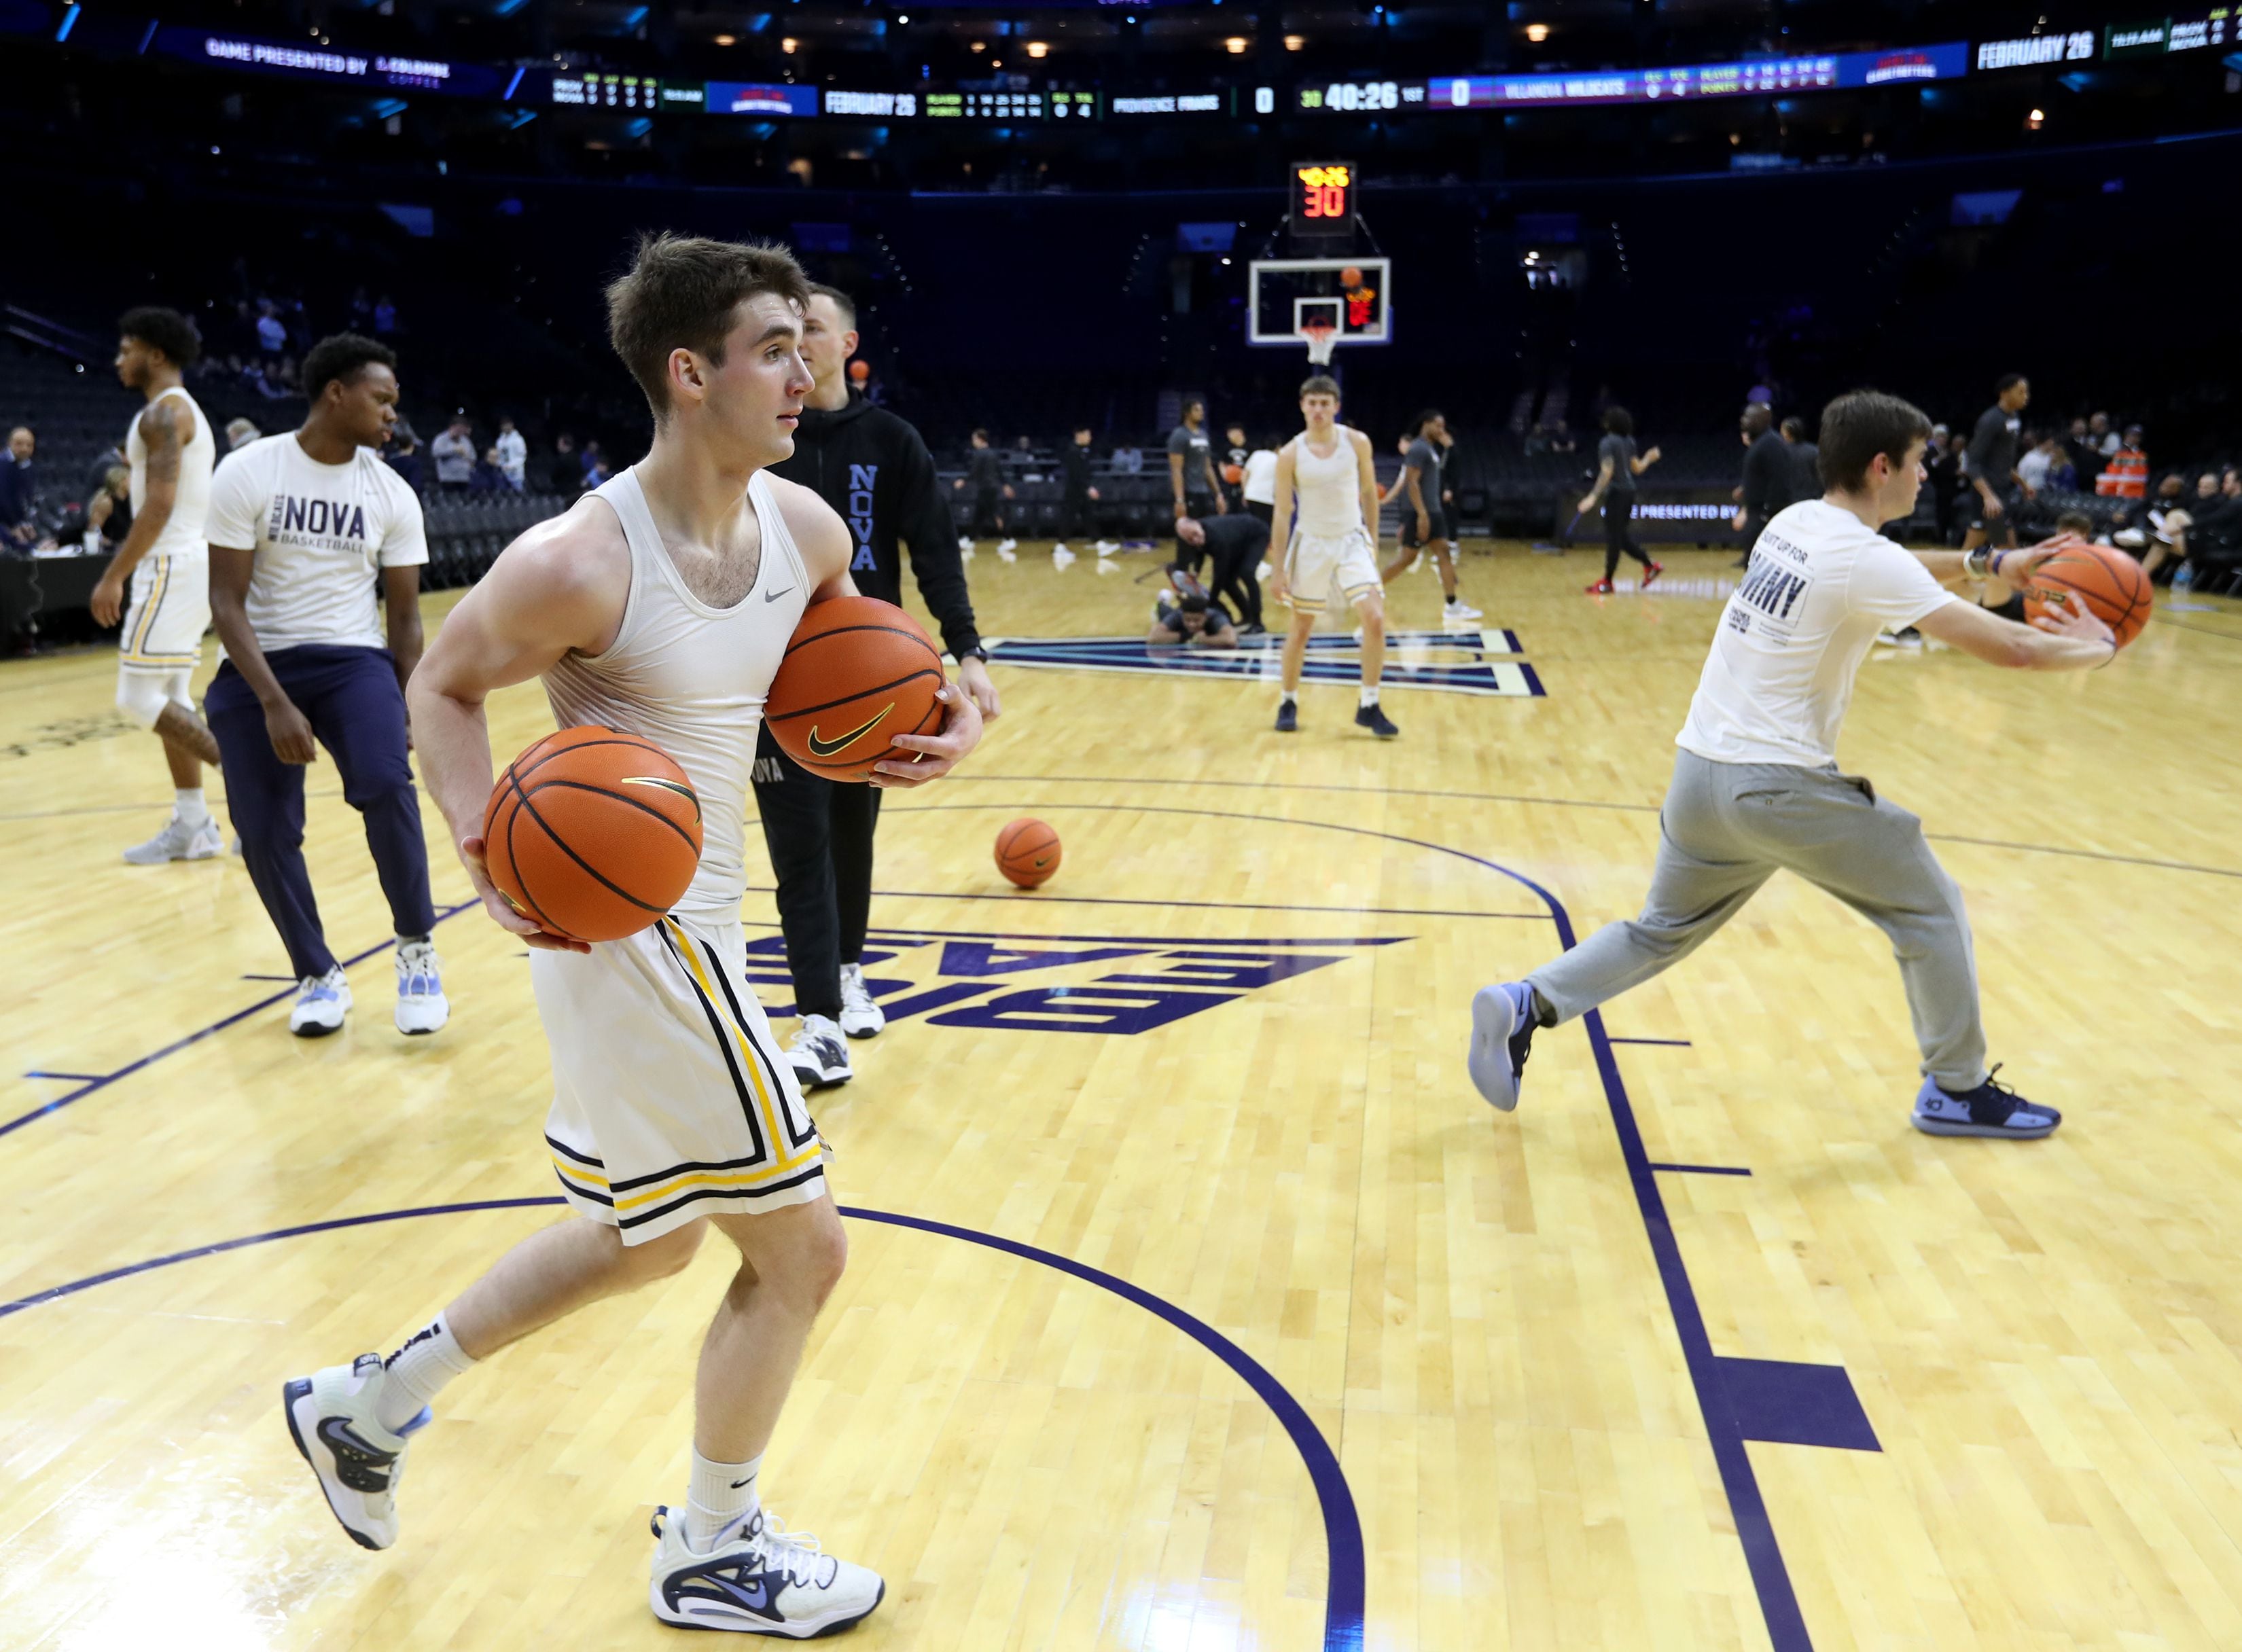 The University of Pittsburgh's basketball team shared the perfect